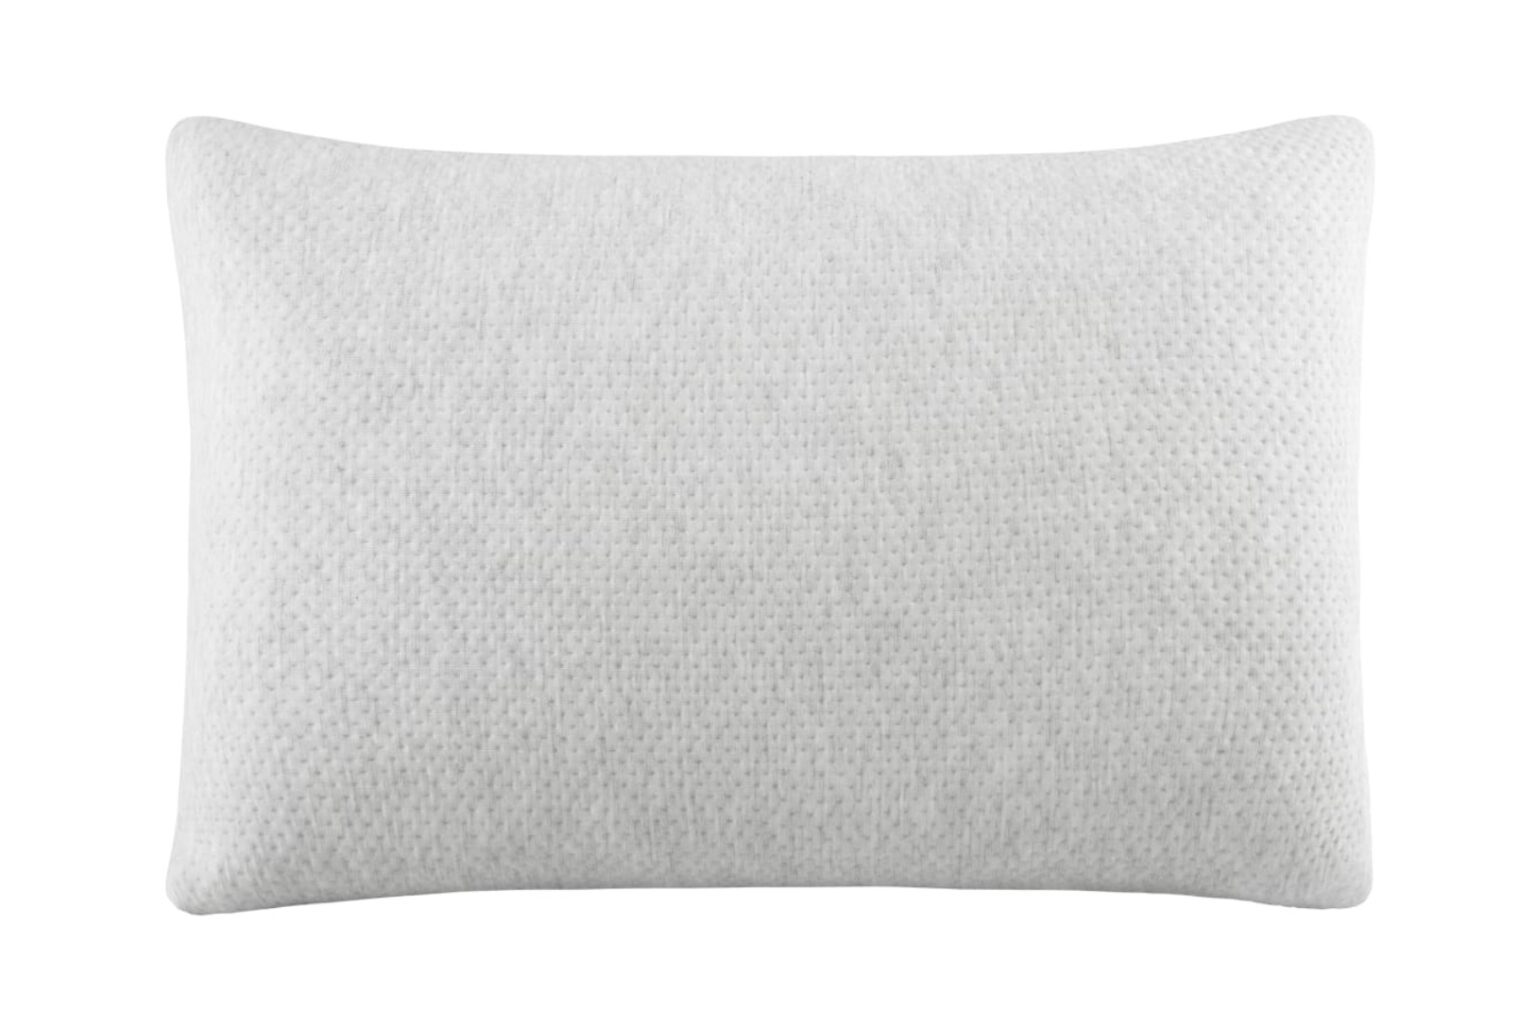 Product page photo of the Brooklyn Bedding Talalay Latex Pillow